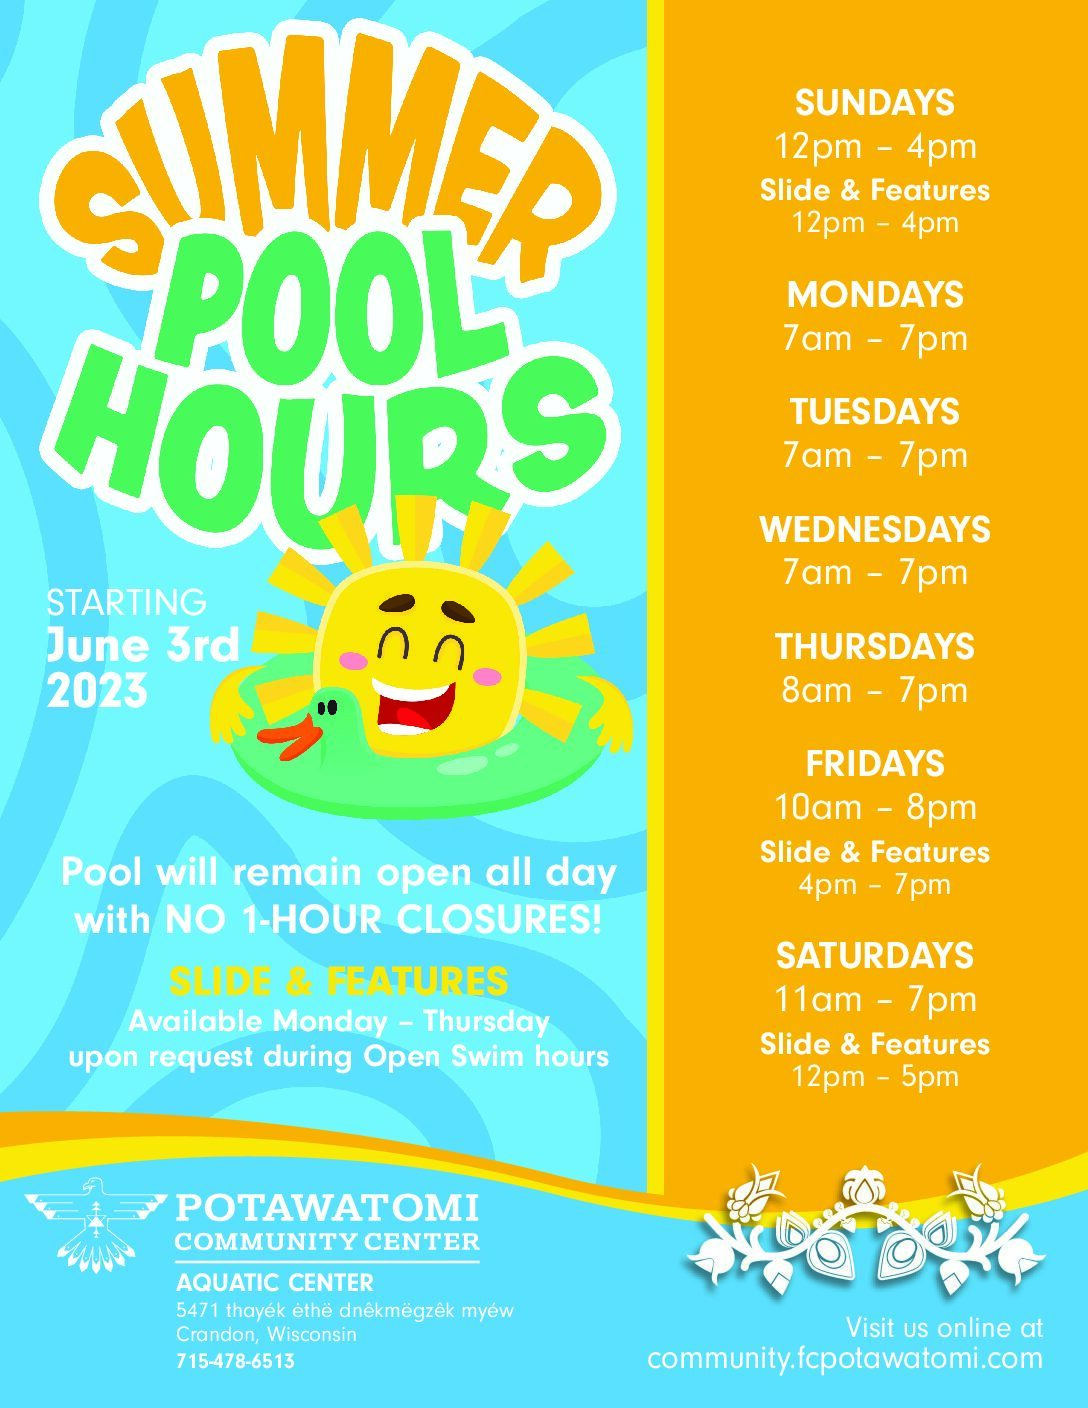 Starting June 3rd, 2023, Pool will remain open all day with NO 1-HOUR CLOSURES!